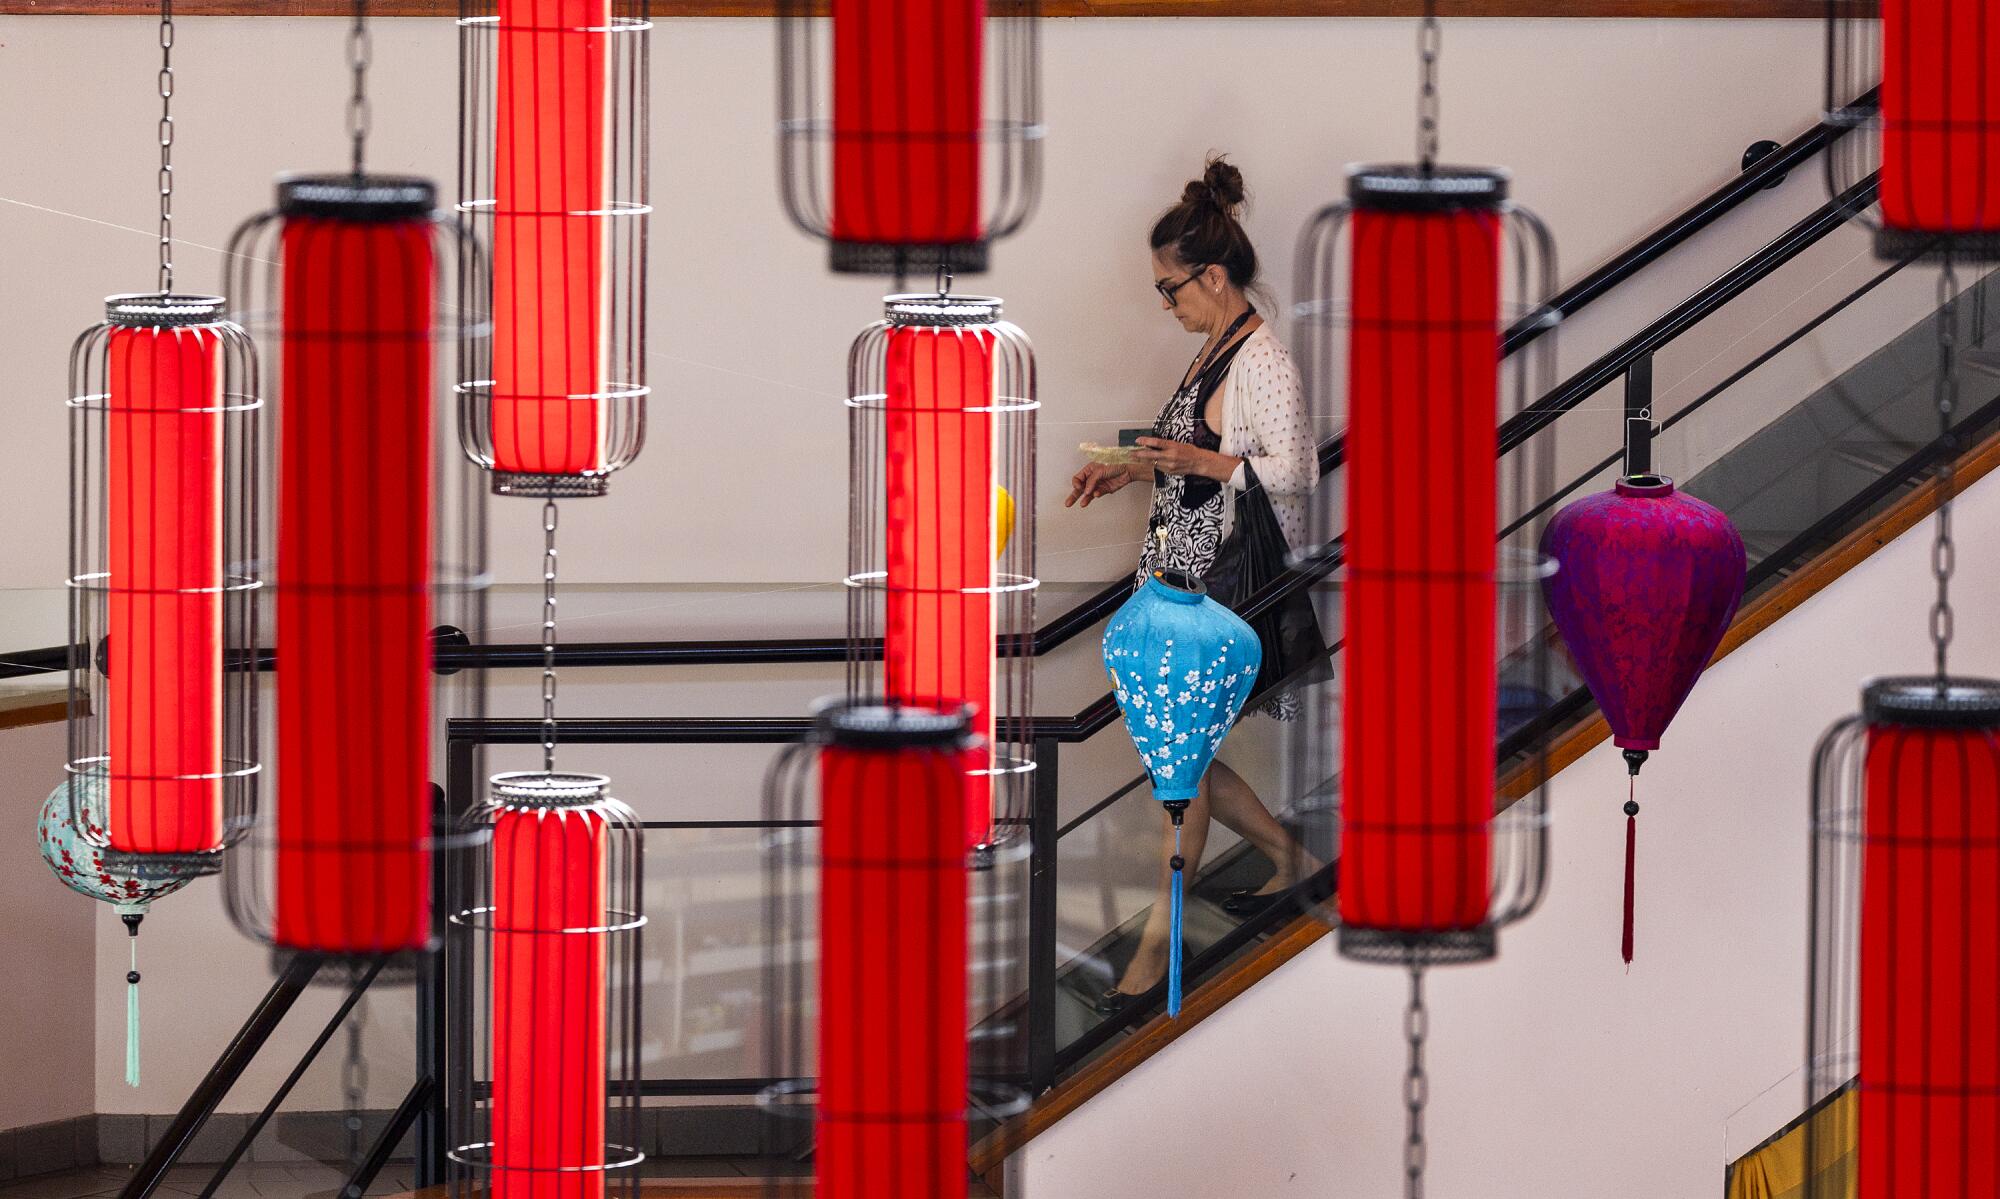 A woman walks down a flight of stairs as red lanterns hang in the foreground.